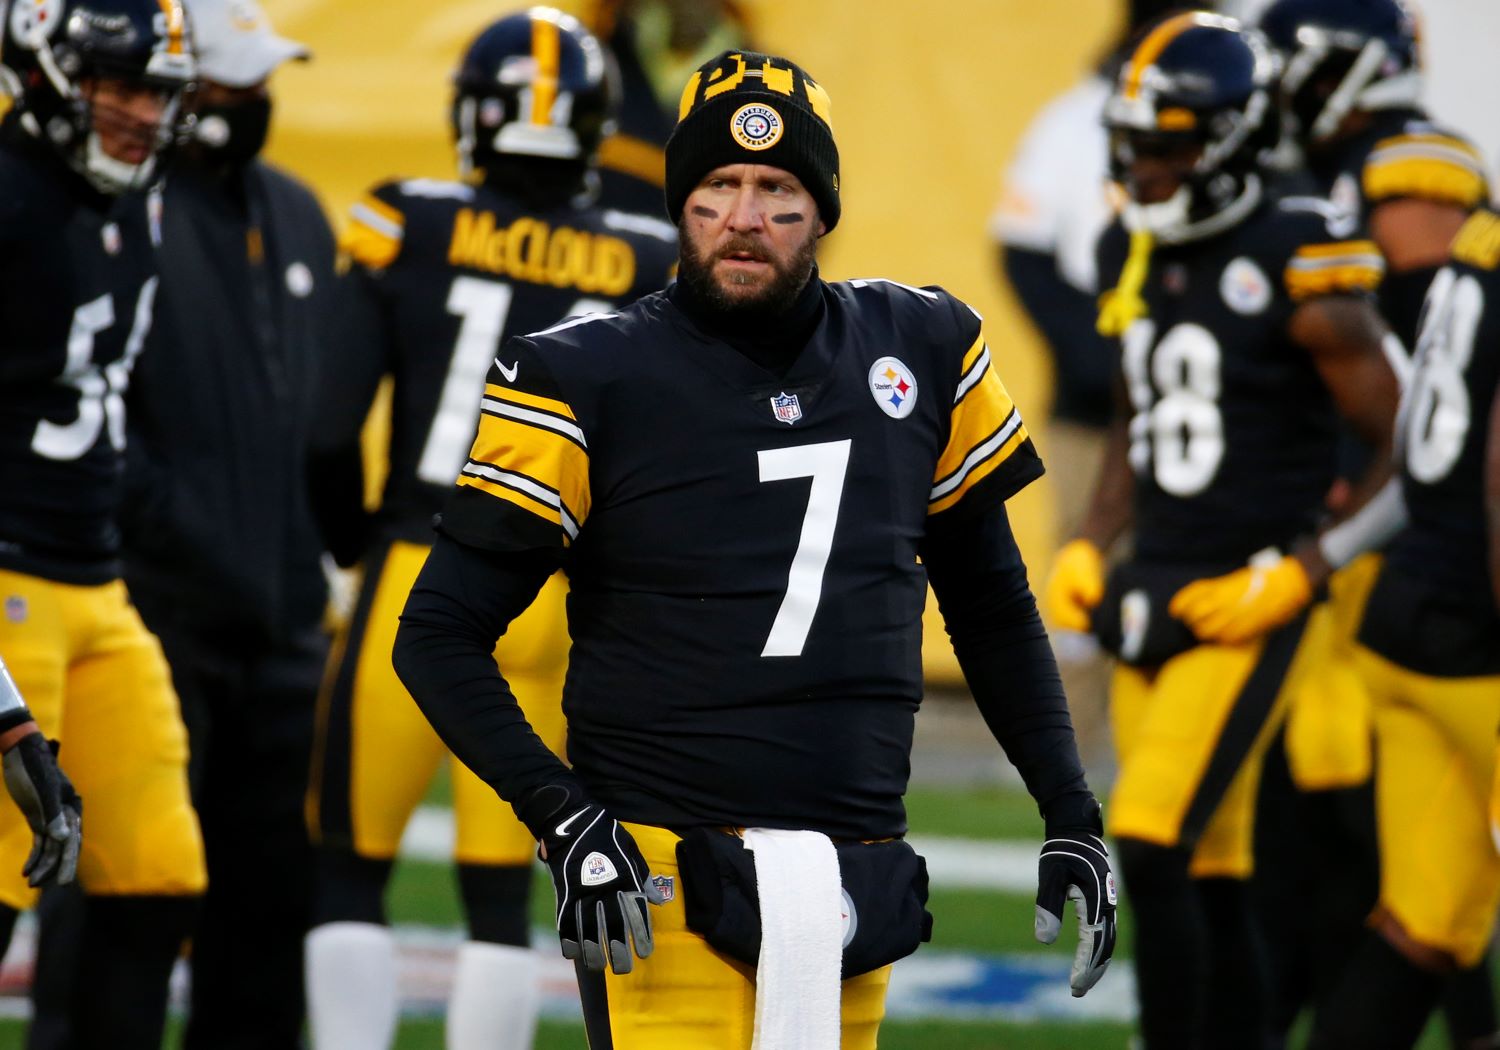 Ben Roethlisberger wants to play in 2021, but the Pittsburgh Steelers have to figure out what to do about his huge $41 million cap hit.